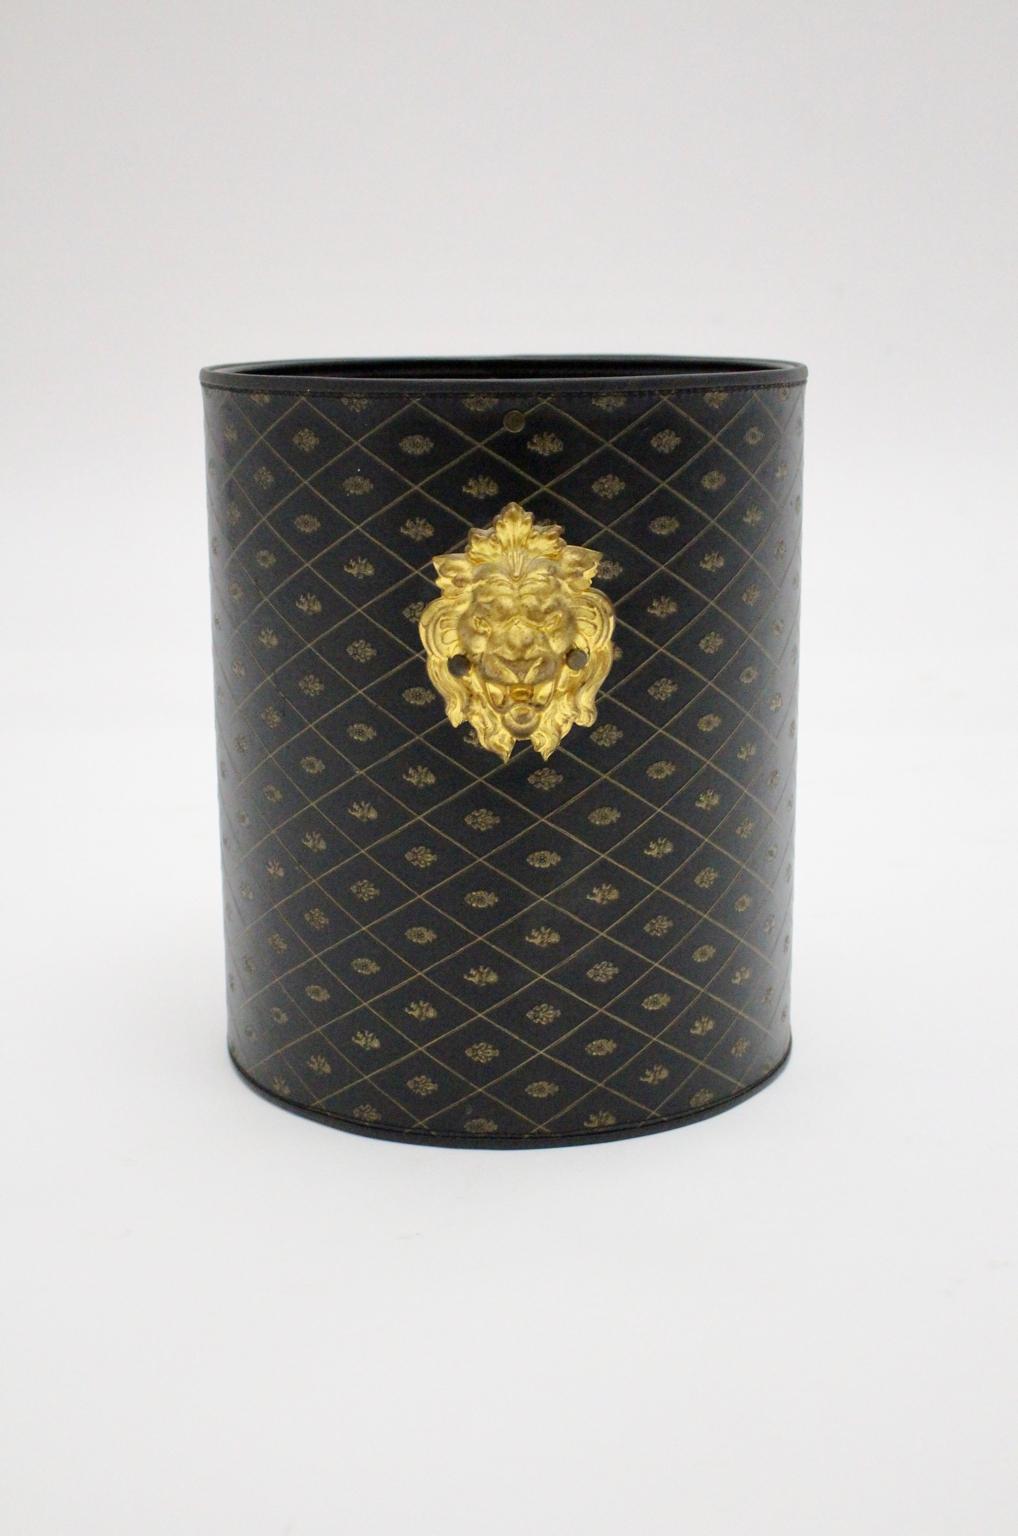 This extraordinary Hollywood Regency leather paper basket was made of brown and black leather with patterns.
Also it is worth to mentioned that the leather surface of the paper basket is decorated with rhomb patterns and emblems. The figures of the